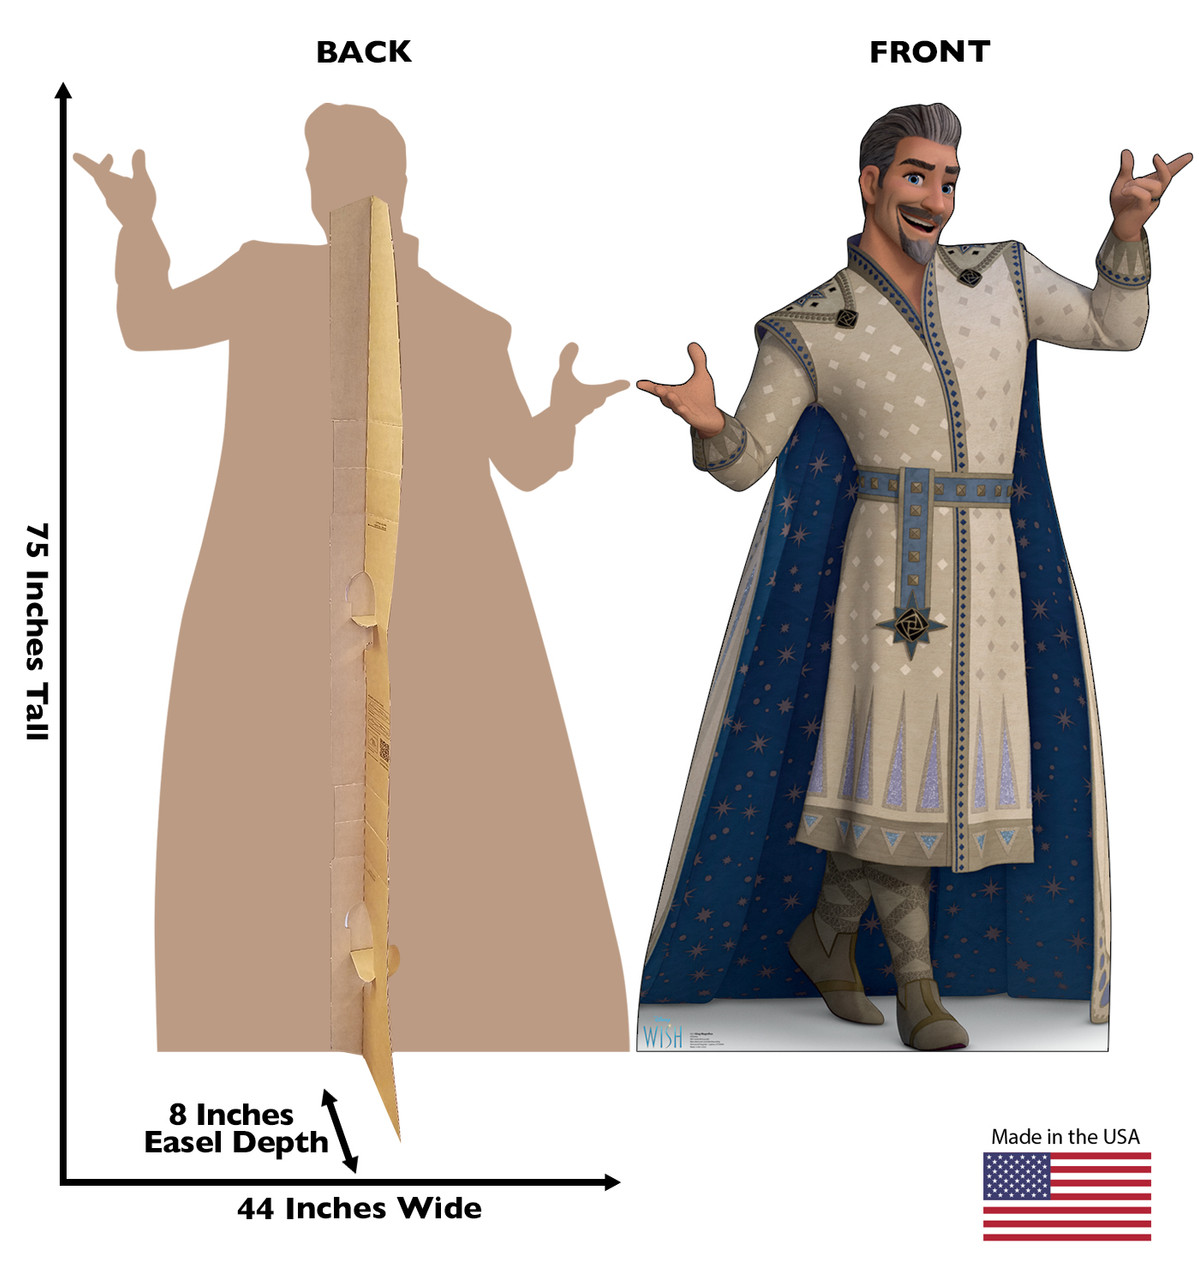 Life-size cardboard standee of King Magnifico with back and front dimensions.